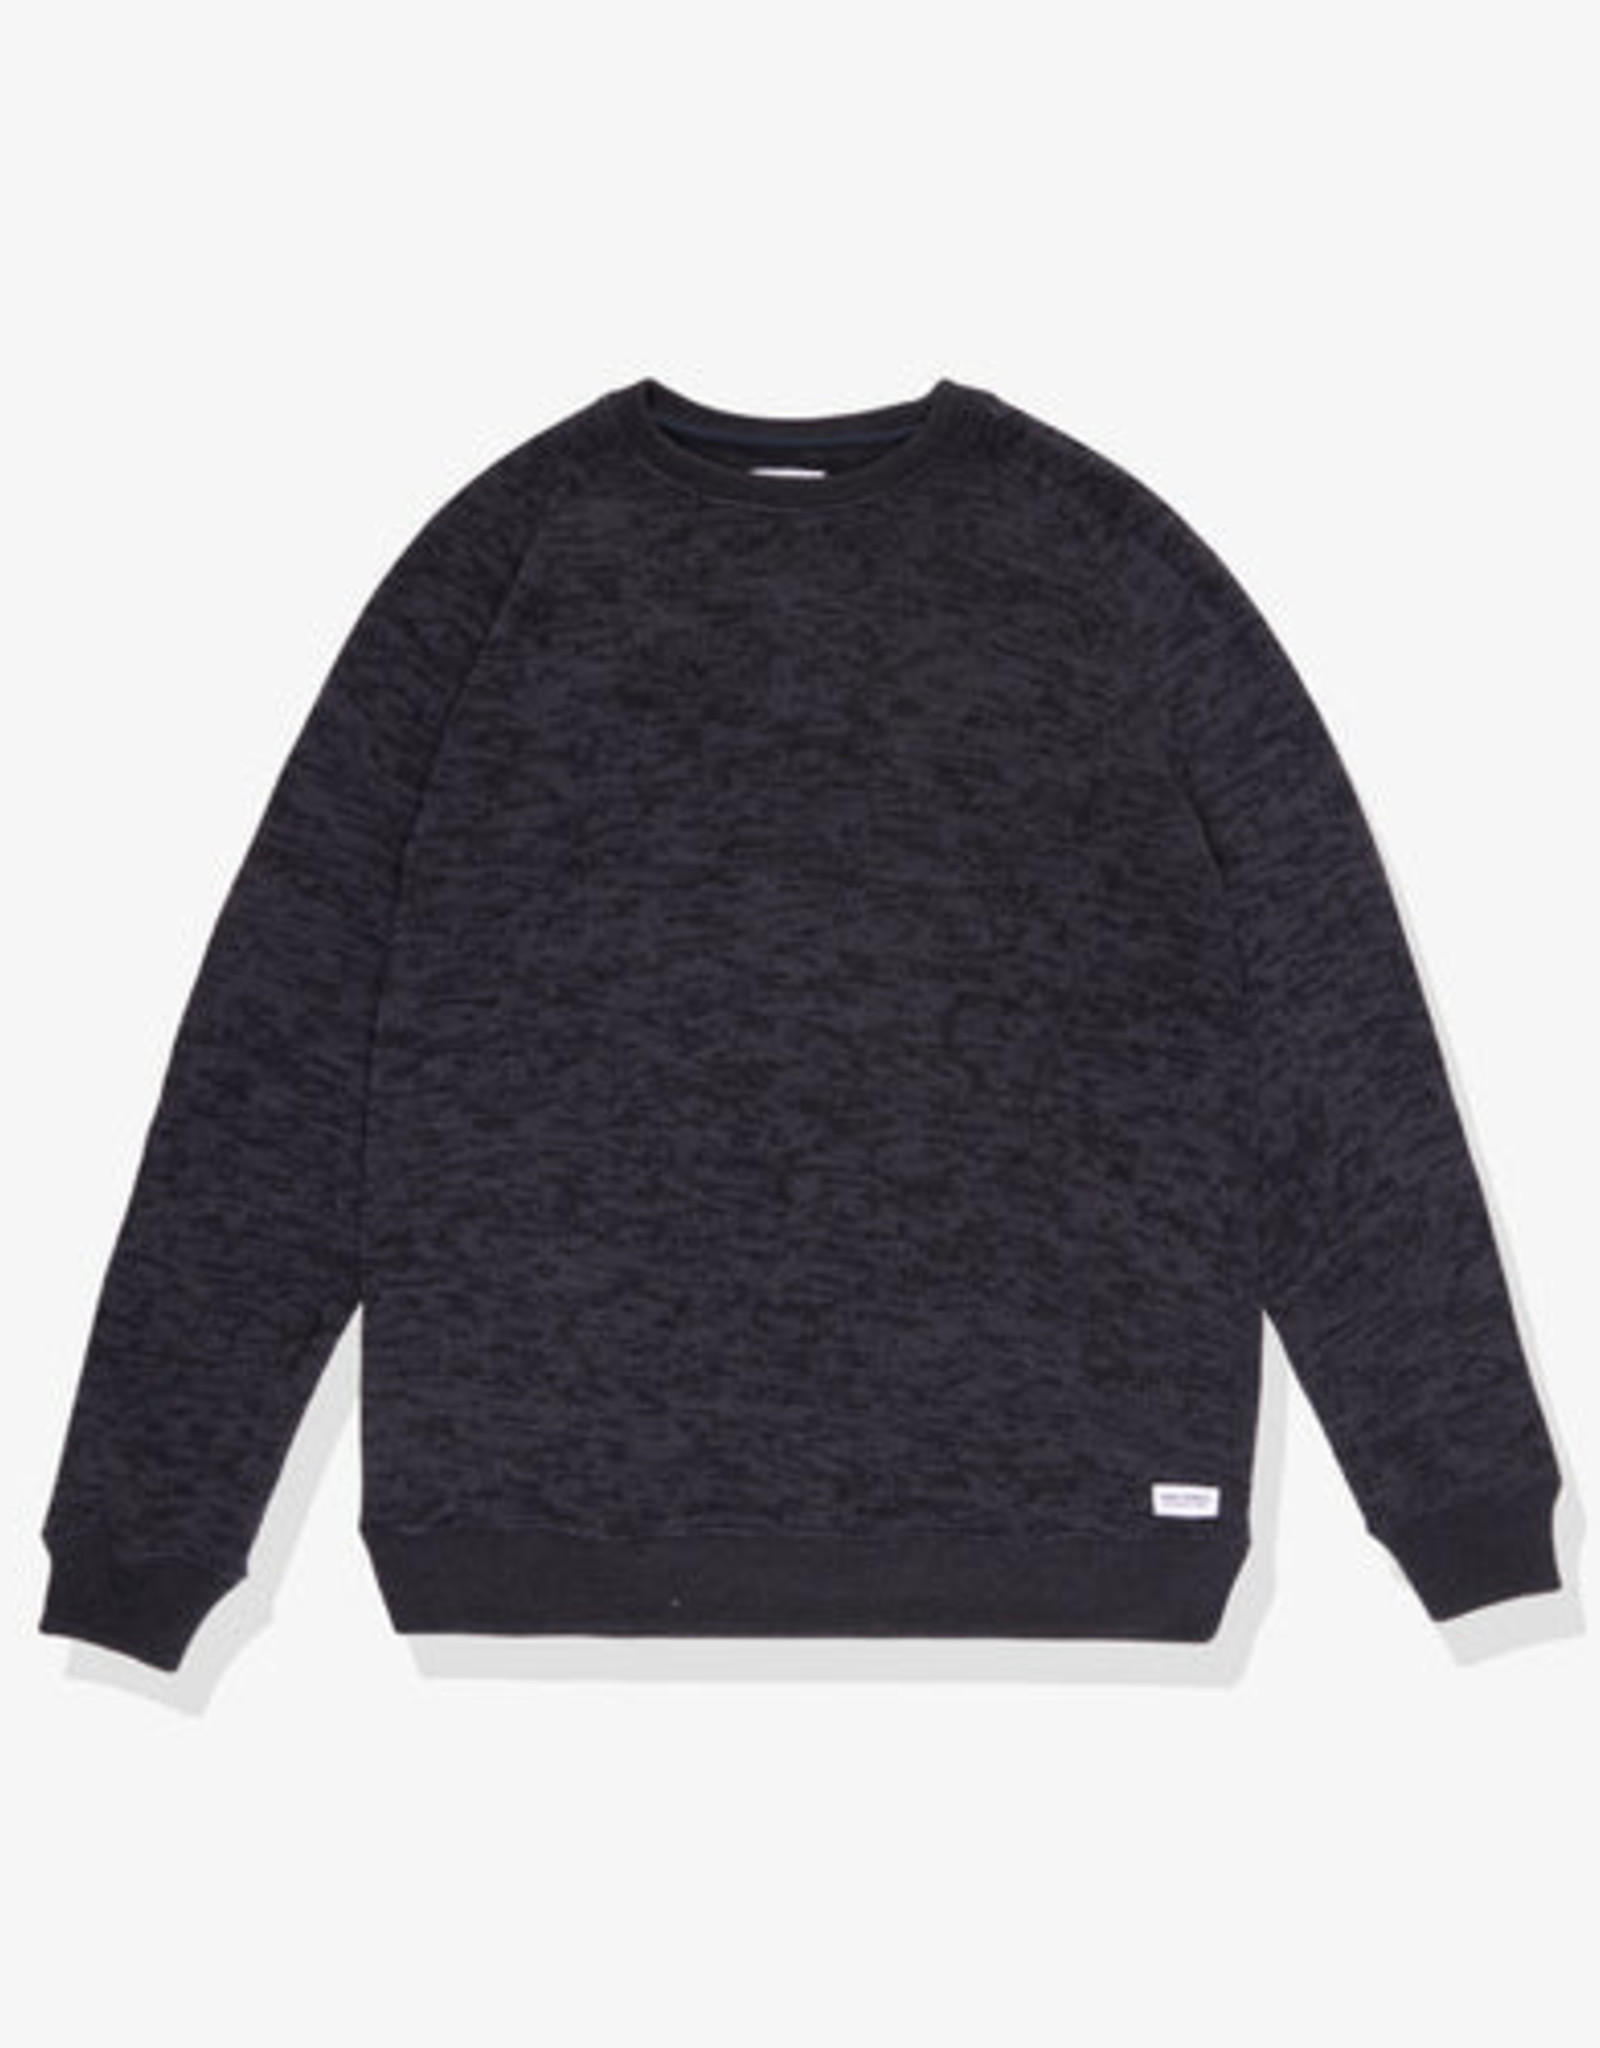 BANKS JOURNAL BANKS JOURNAL STATIC KNIT SWEATER - MIDNIGHT